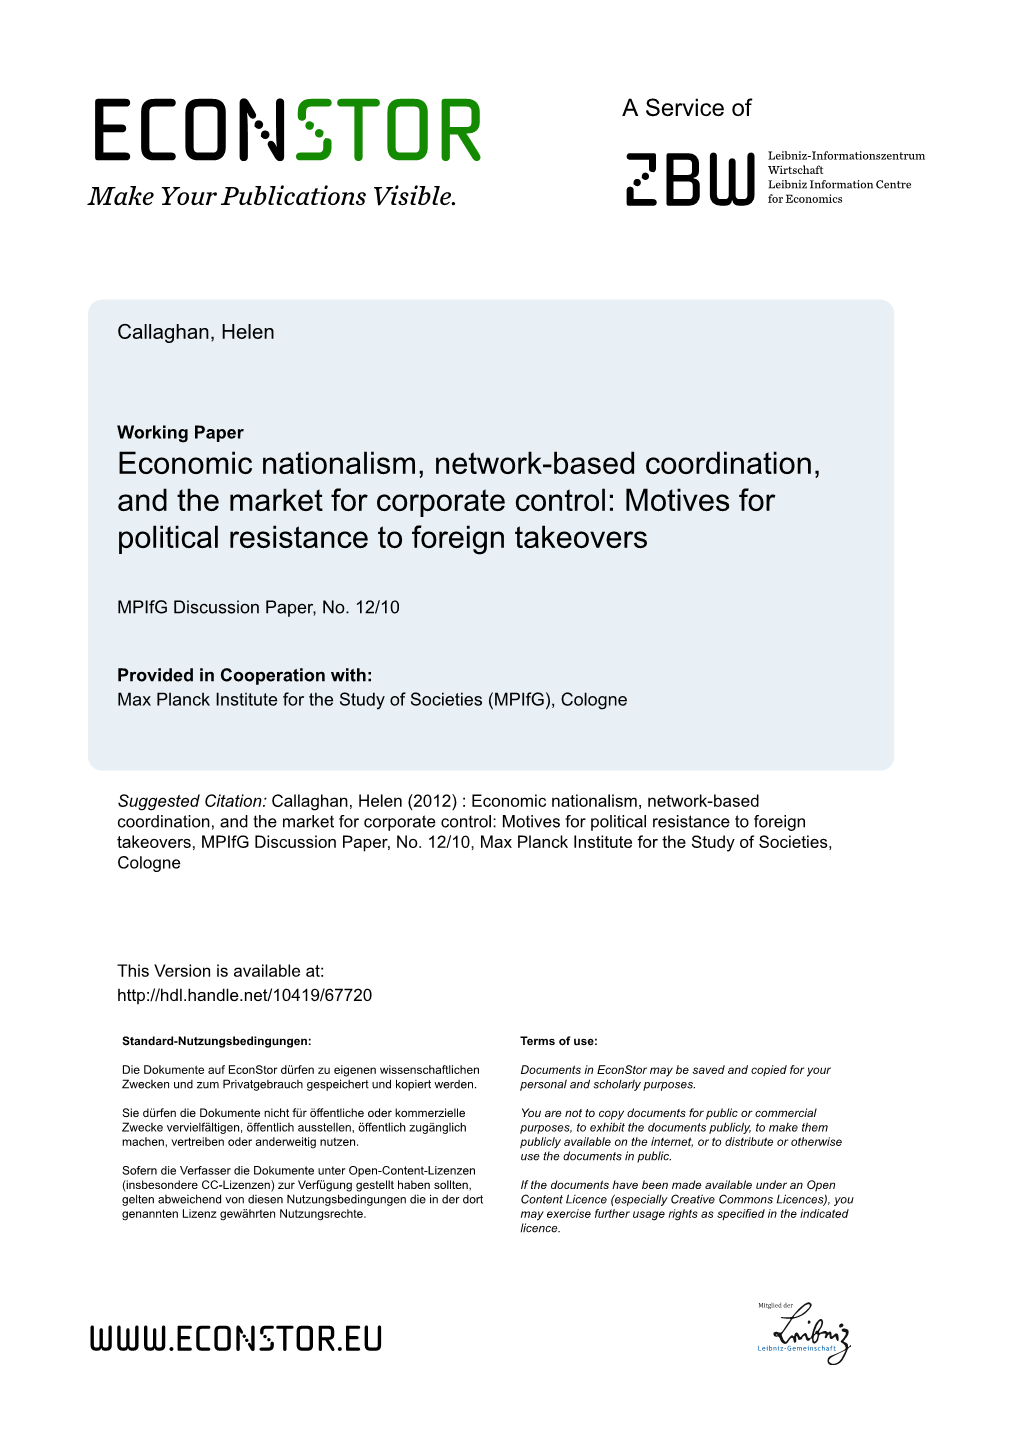 Economic Nationalism, Network-Based Coordination, and the Market for Corporate Control: Motives for Political Resistance to Foreign Takeovers